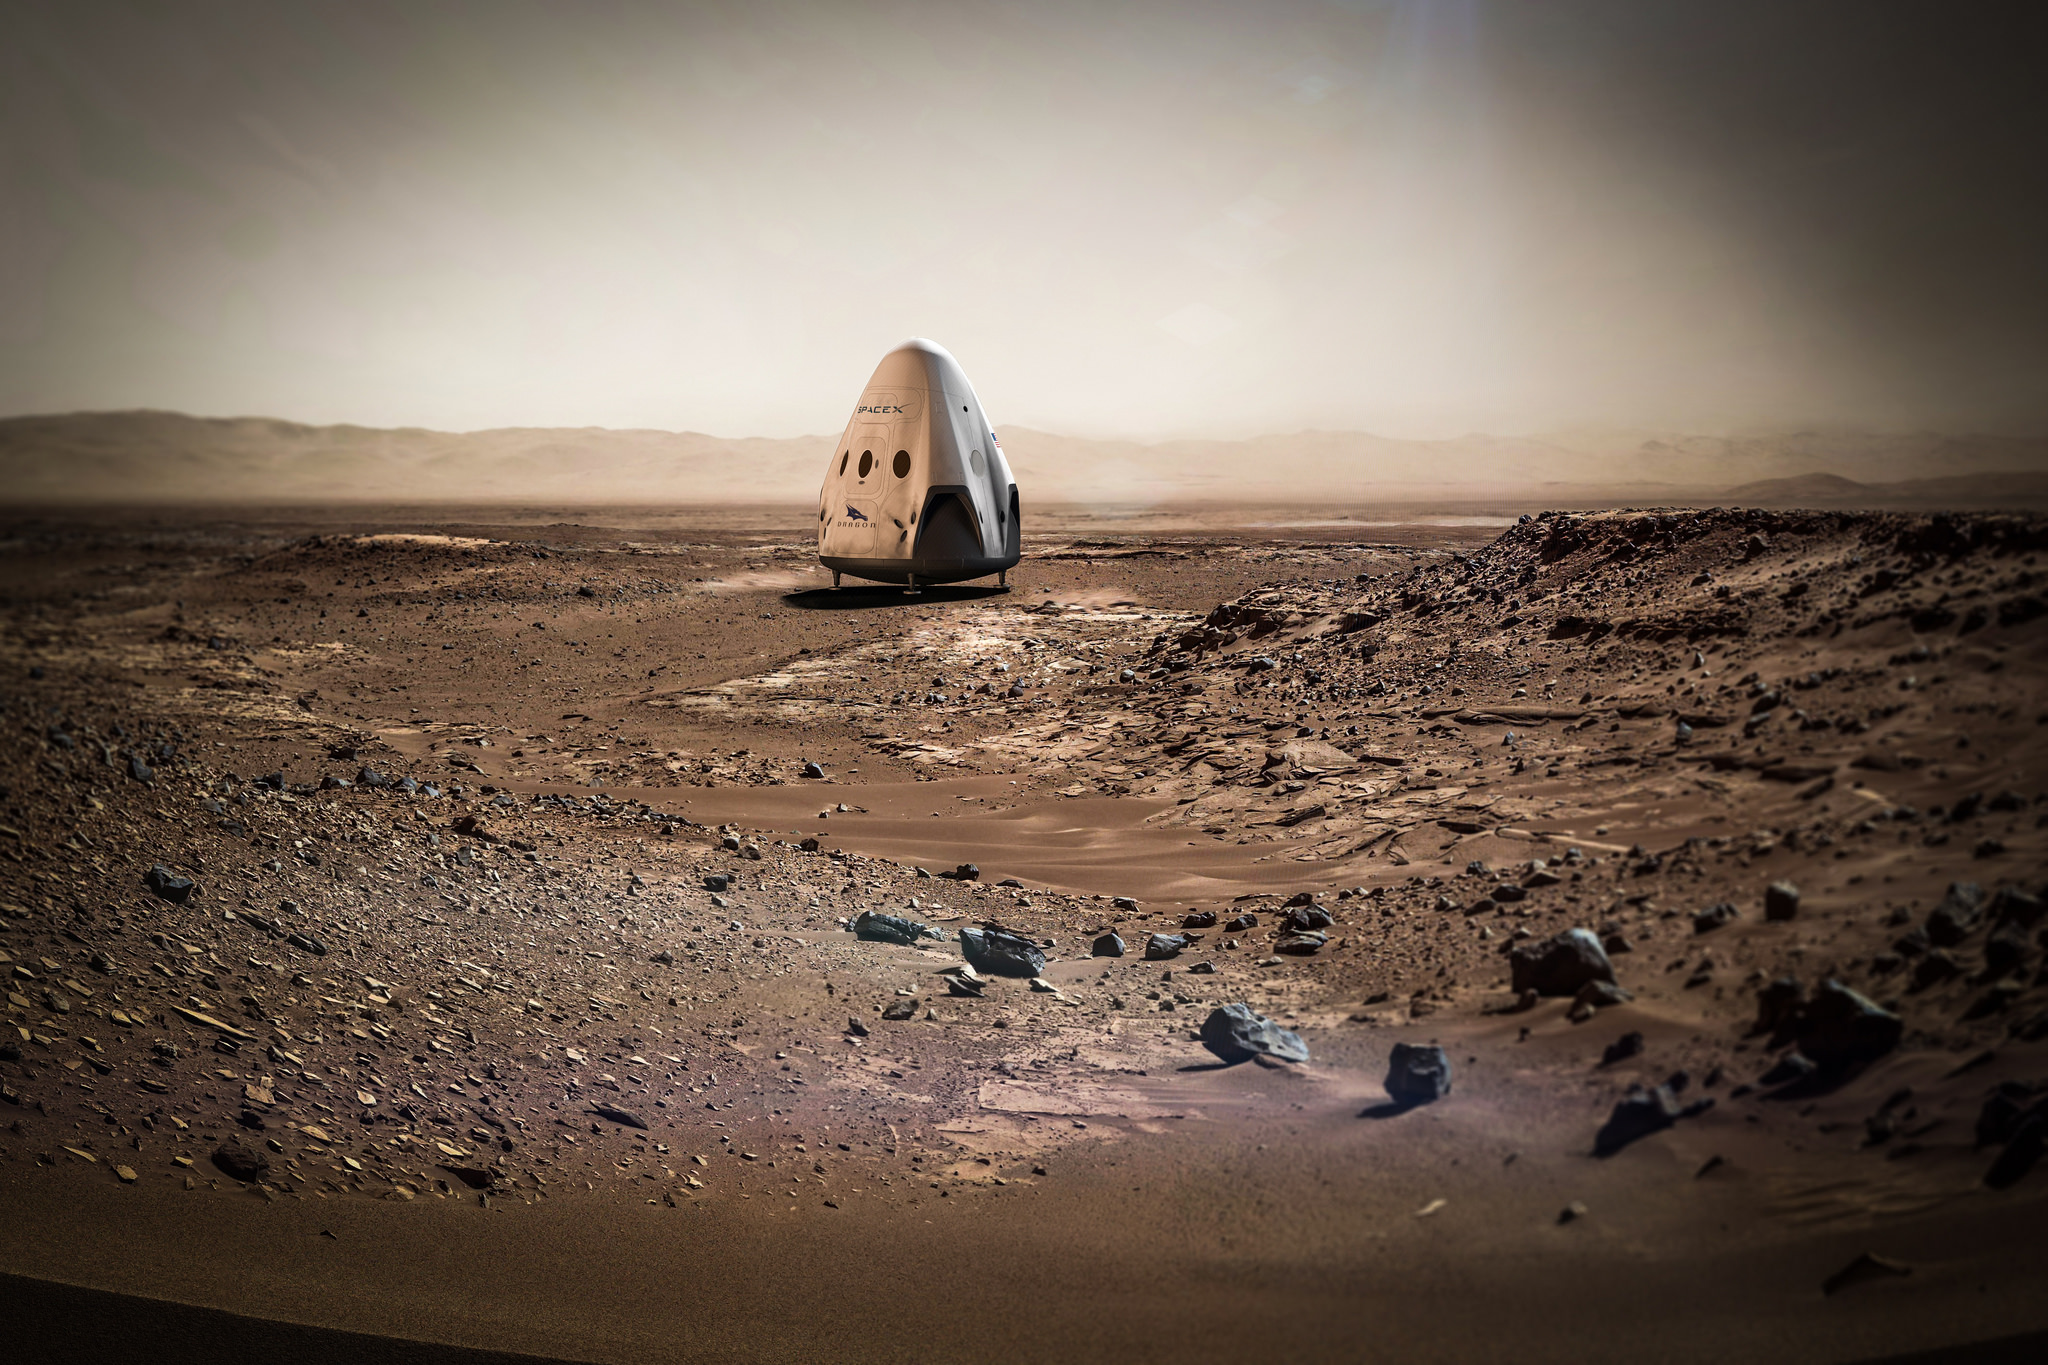 spacex appears to be on track for mars by 2018 but has legal hurdles clear